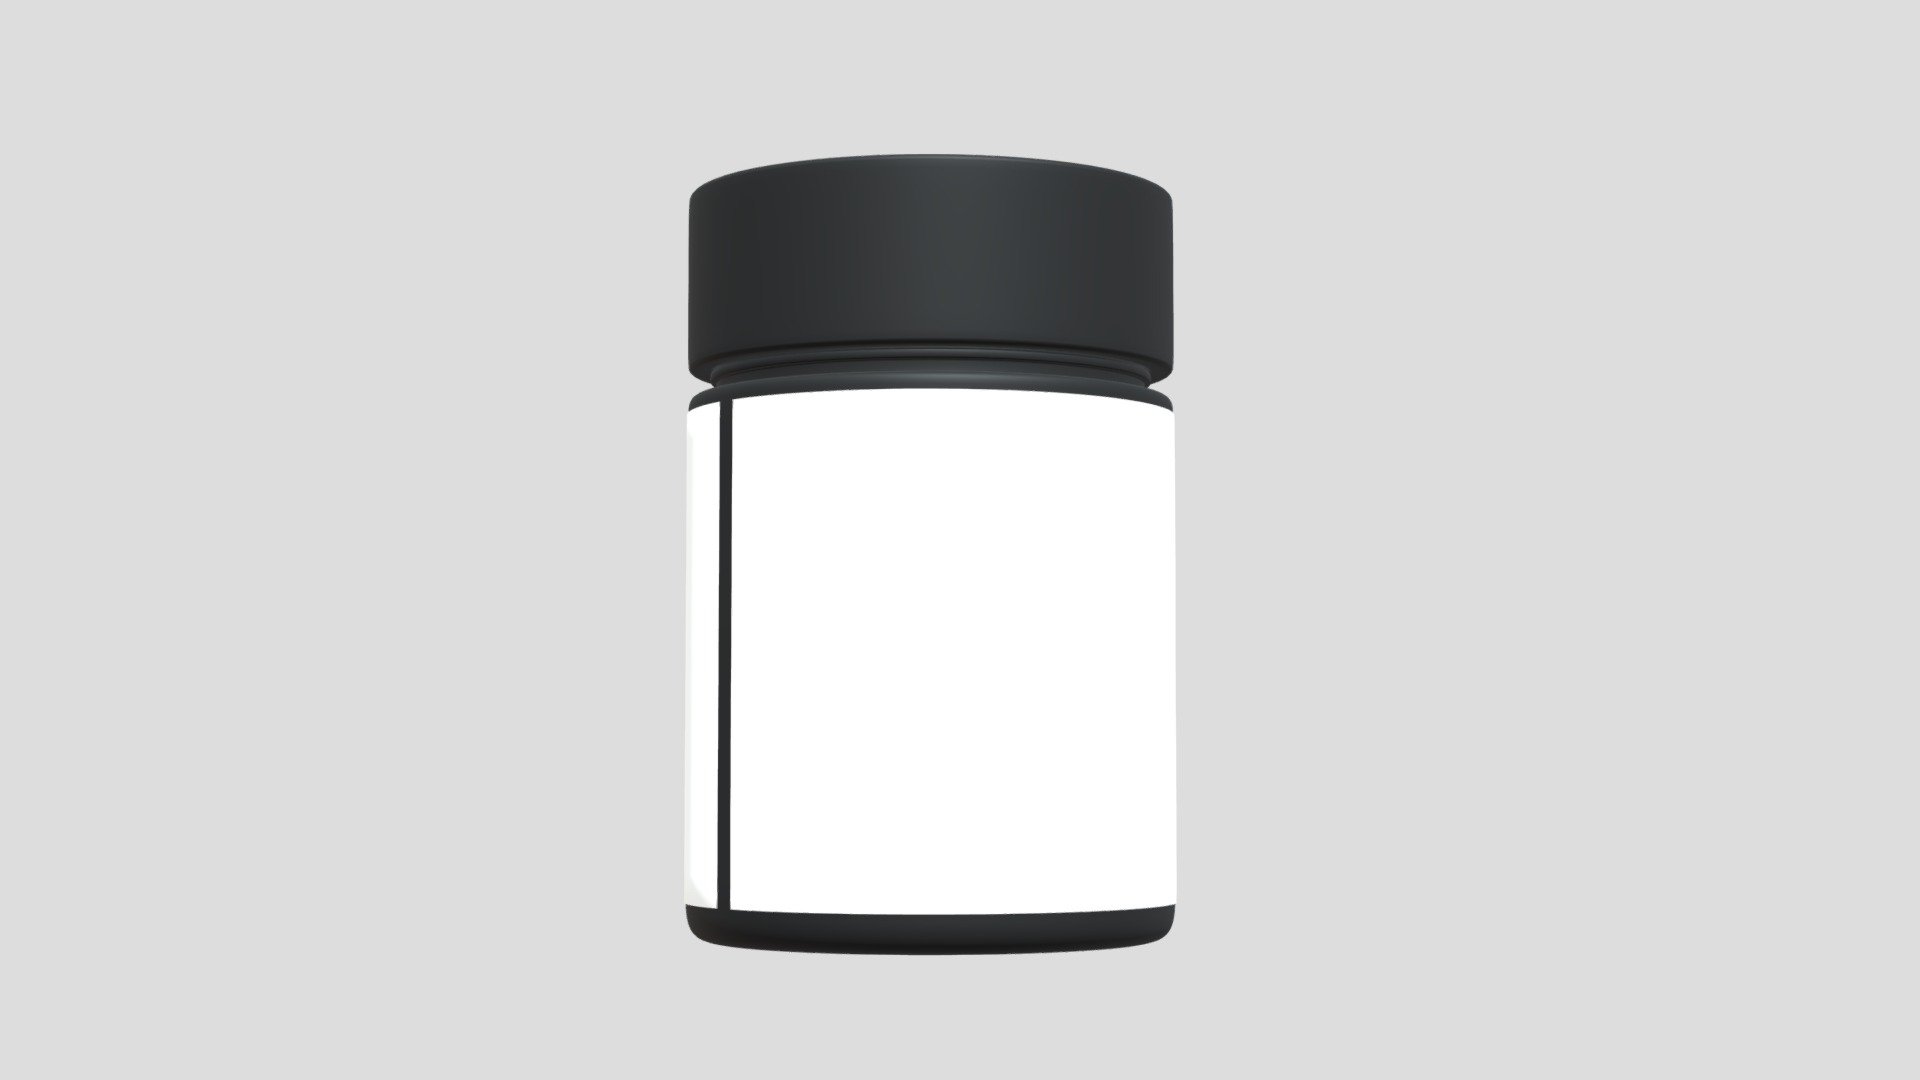 Plastic Jars with labels is a realistic 3D model that can be used for various purposes.
The model consists customizable labels. You can easily change the label to your own design or text using any image editing software.
The model is suitable for commercials, cinematics, videos, TV shows and so on.
The model is compatible with most 3D software and render engines. The model is available in FBX file format.

Lid, jar and label in separate meshes.

Plastic jar has 14260 polygons 3d model